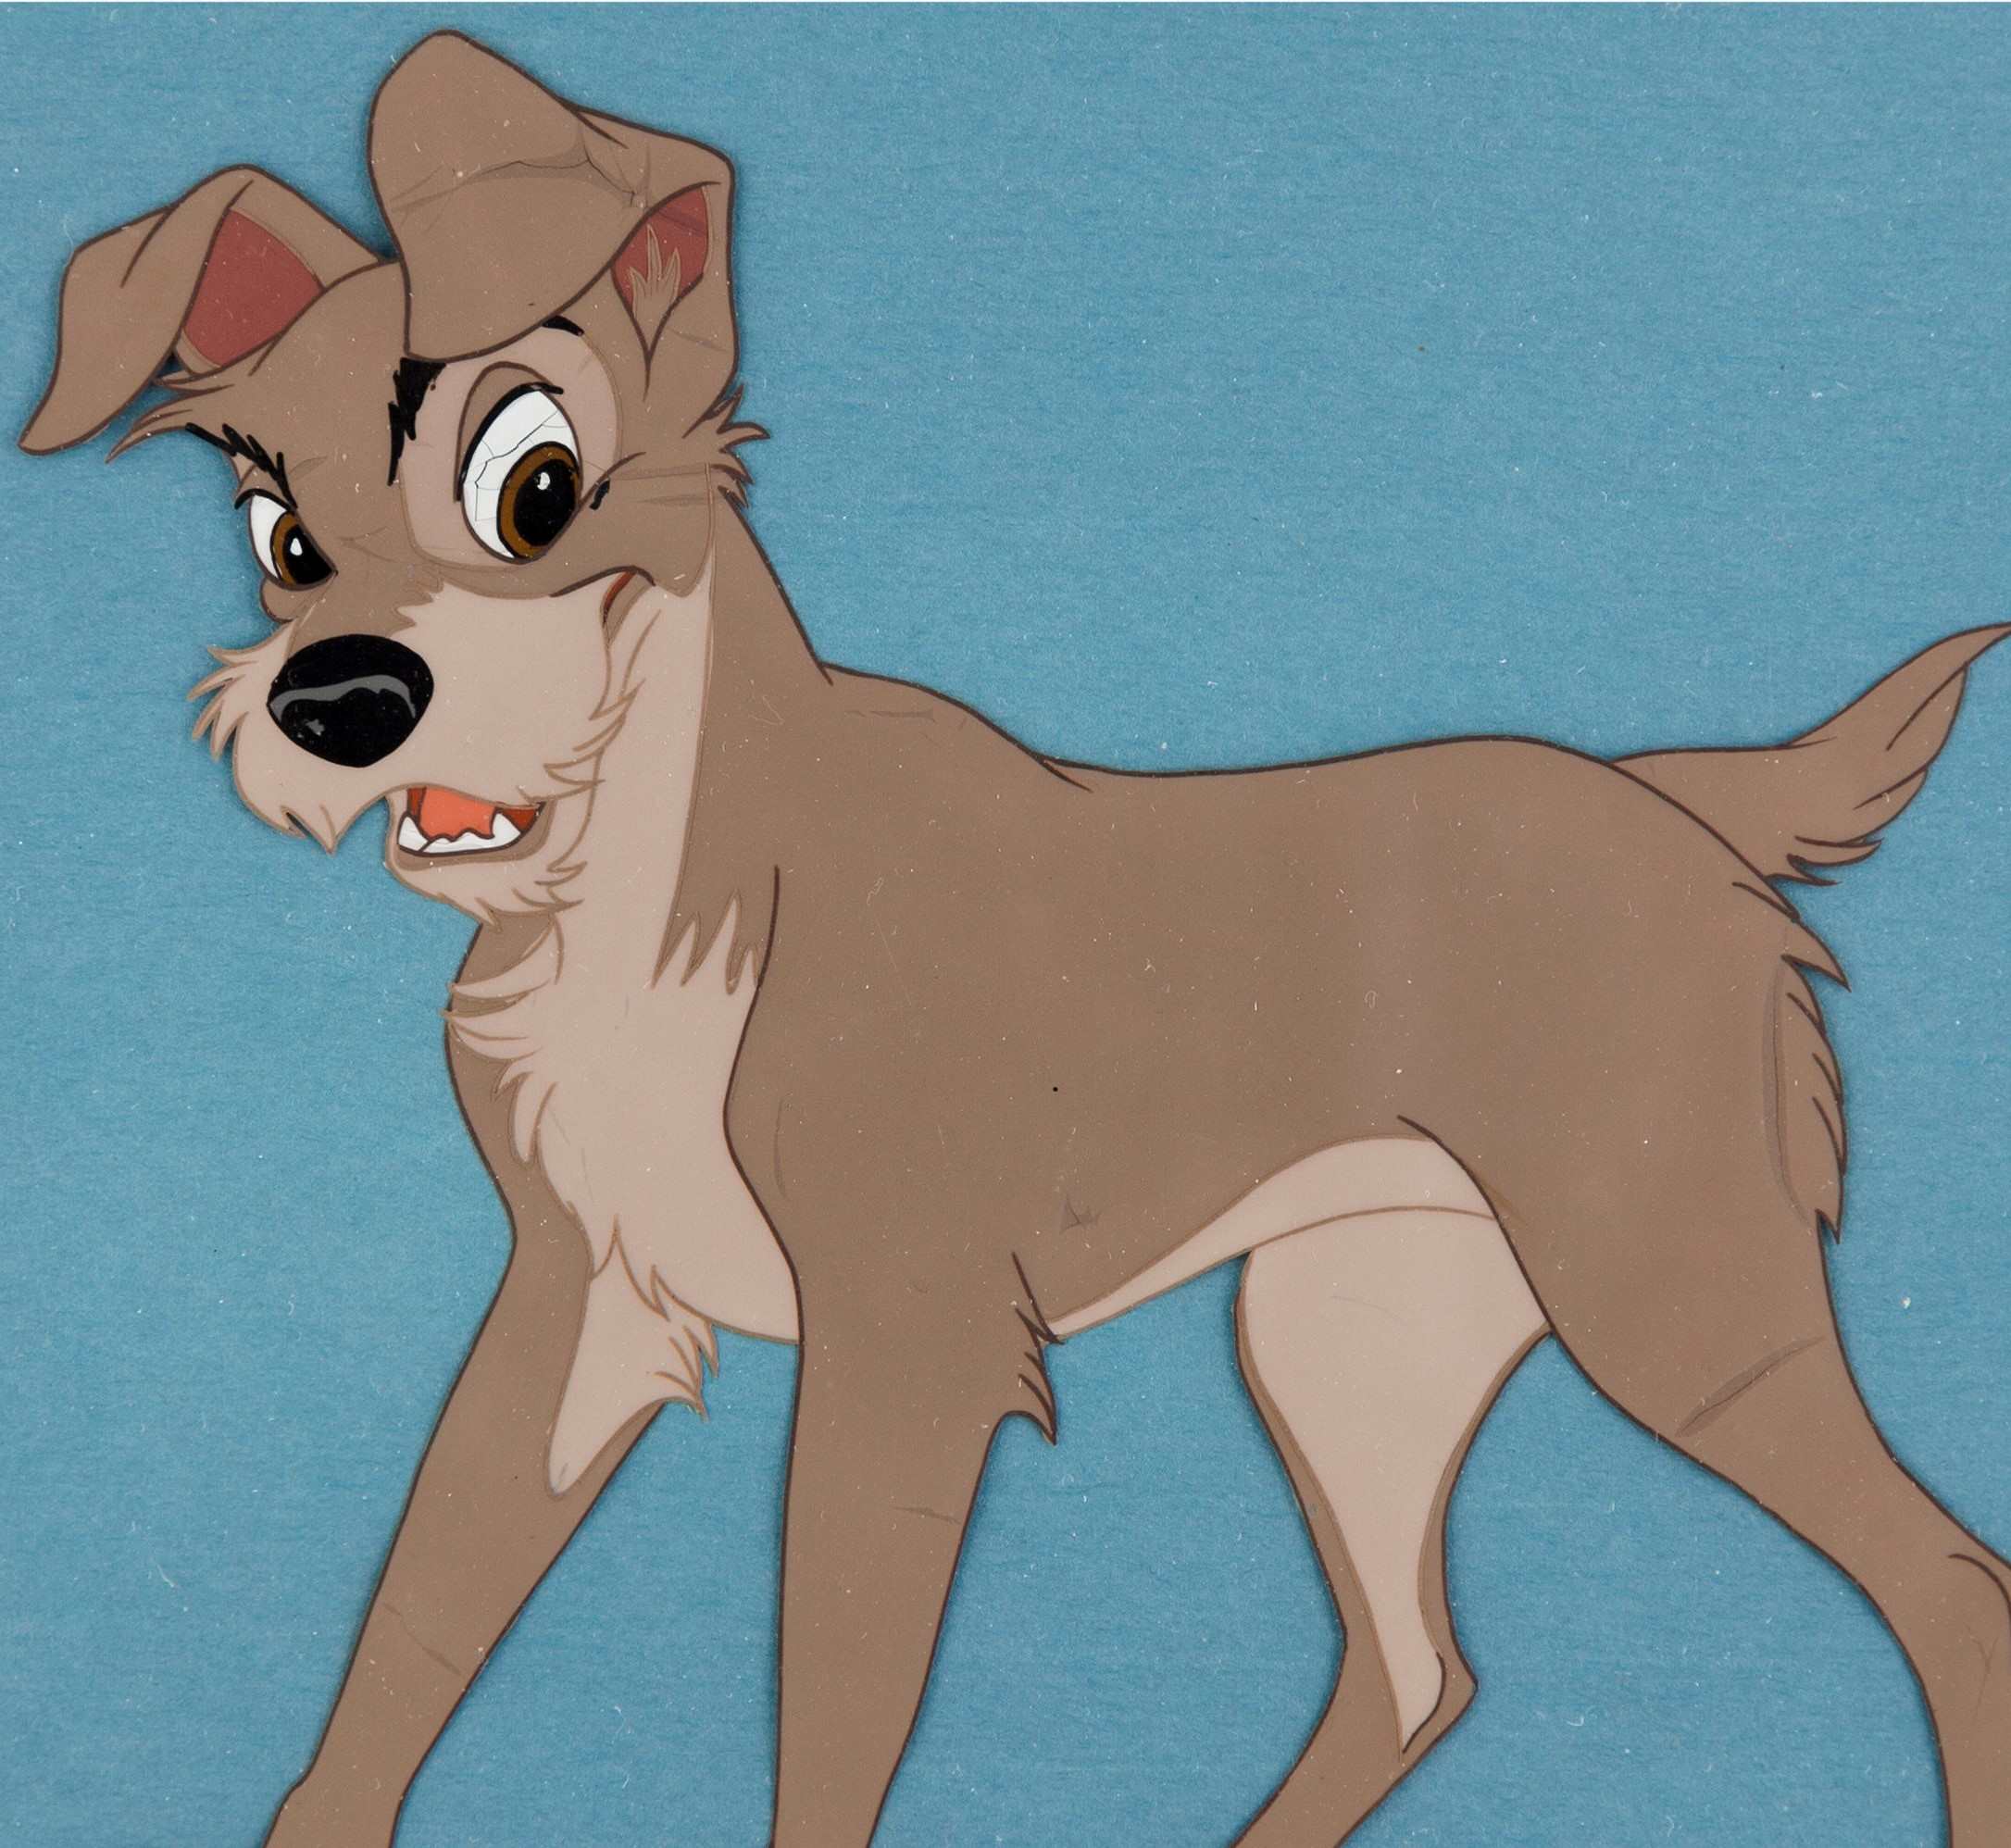 Eight Things You May Not Know About Lady and the Tramp